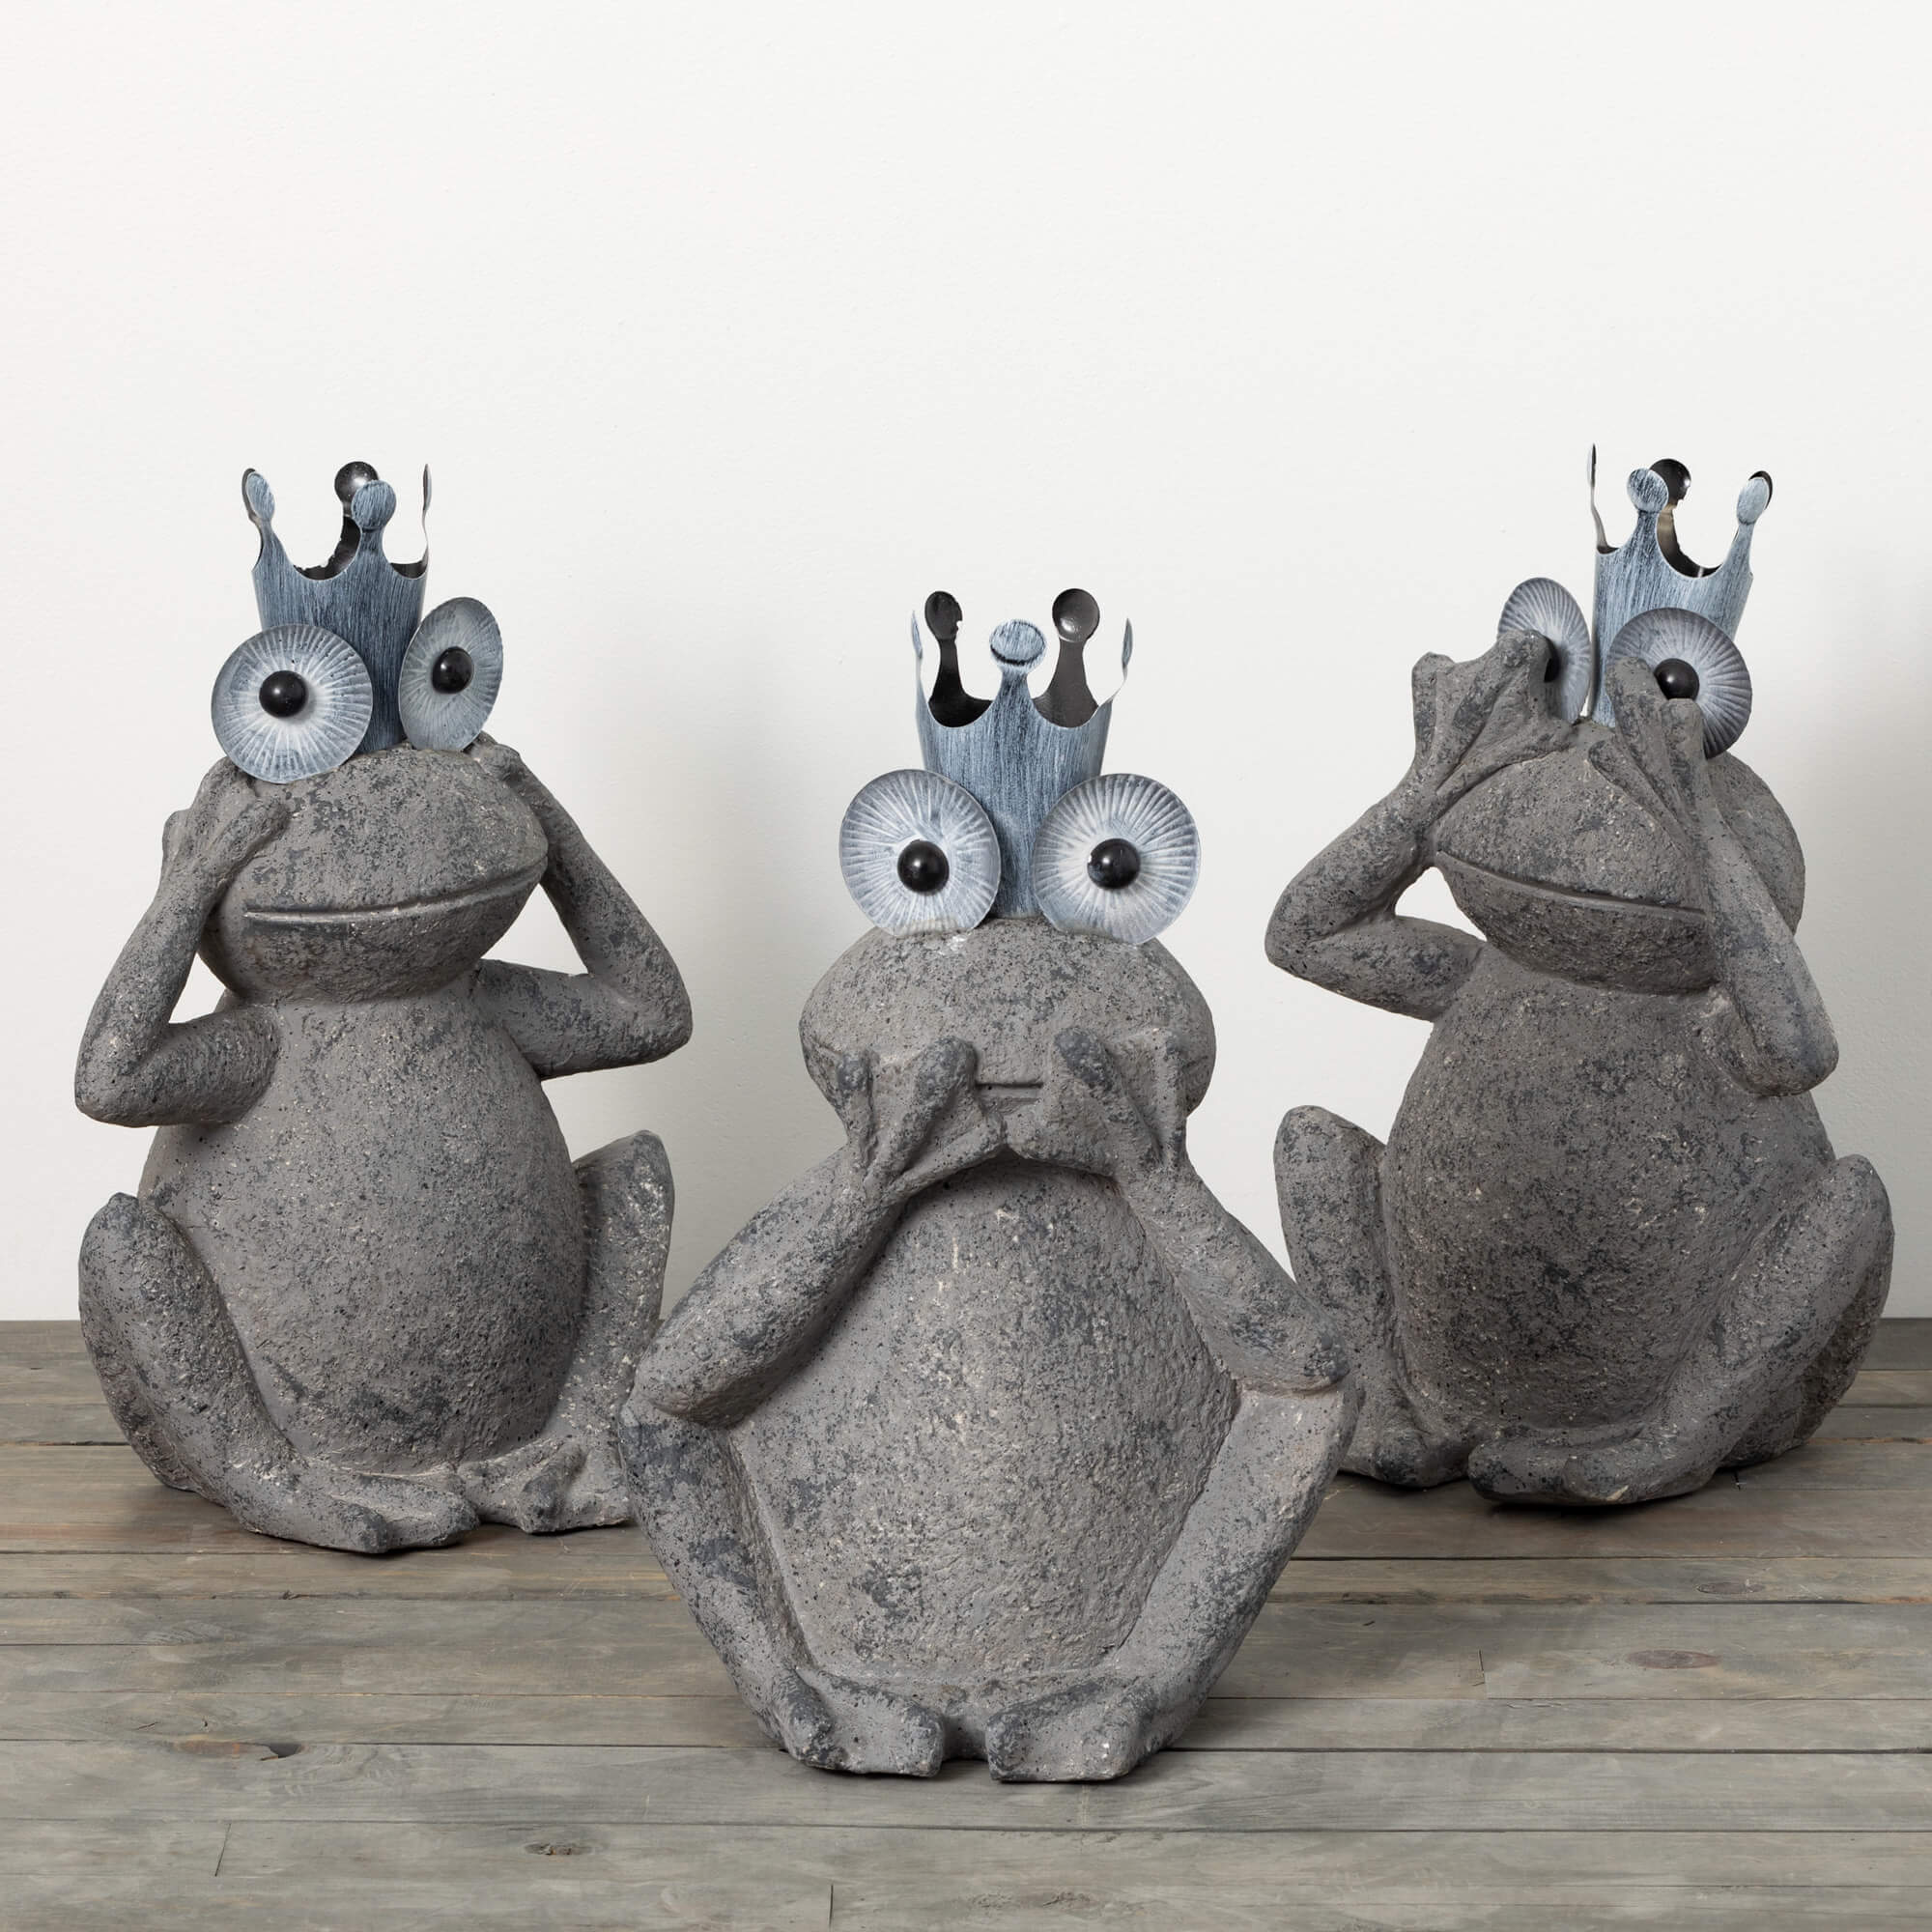 Gray Frog Garden Statues Elevate Home Decor - Outdoors